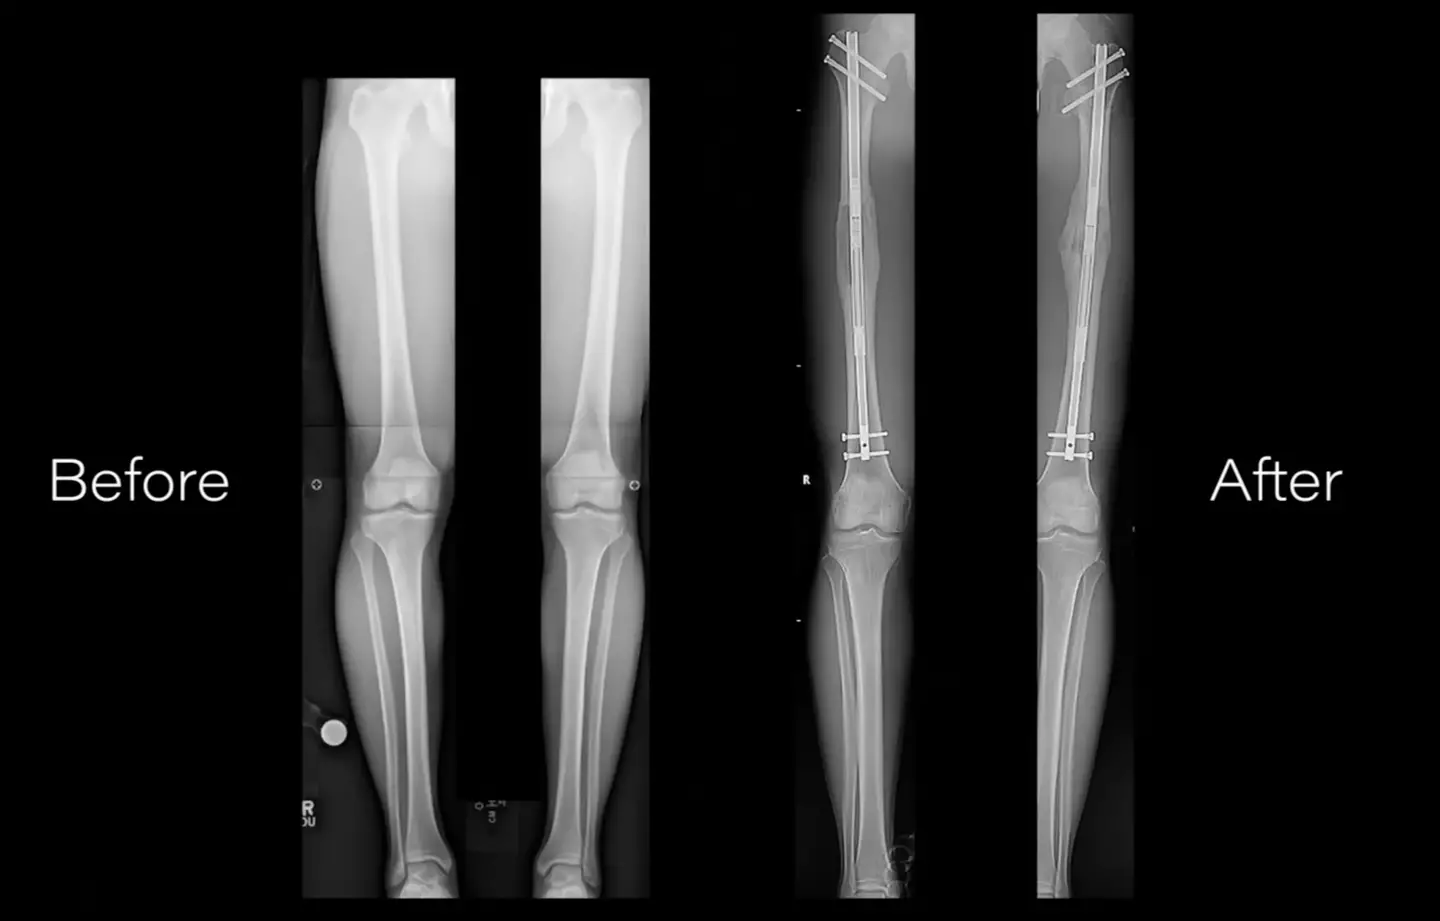 A before and after scan of leg lengthening surgery.